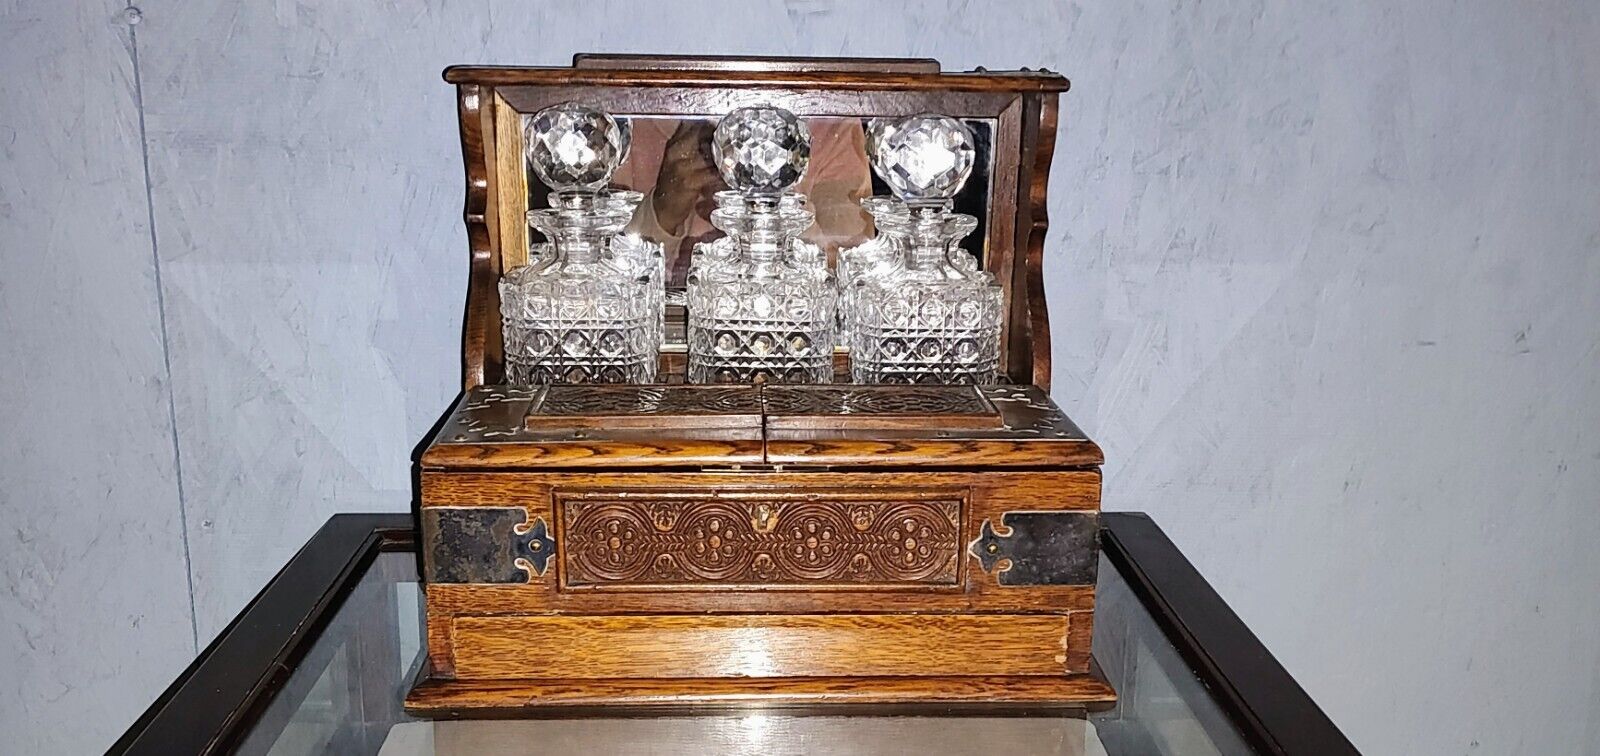 Antique English Victorian Oak Tantalus w/ Crystal Decanters Very nice w/ drawer